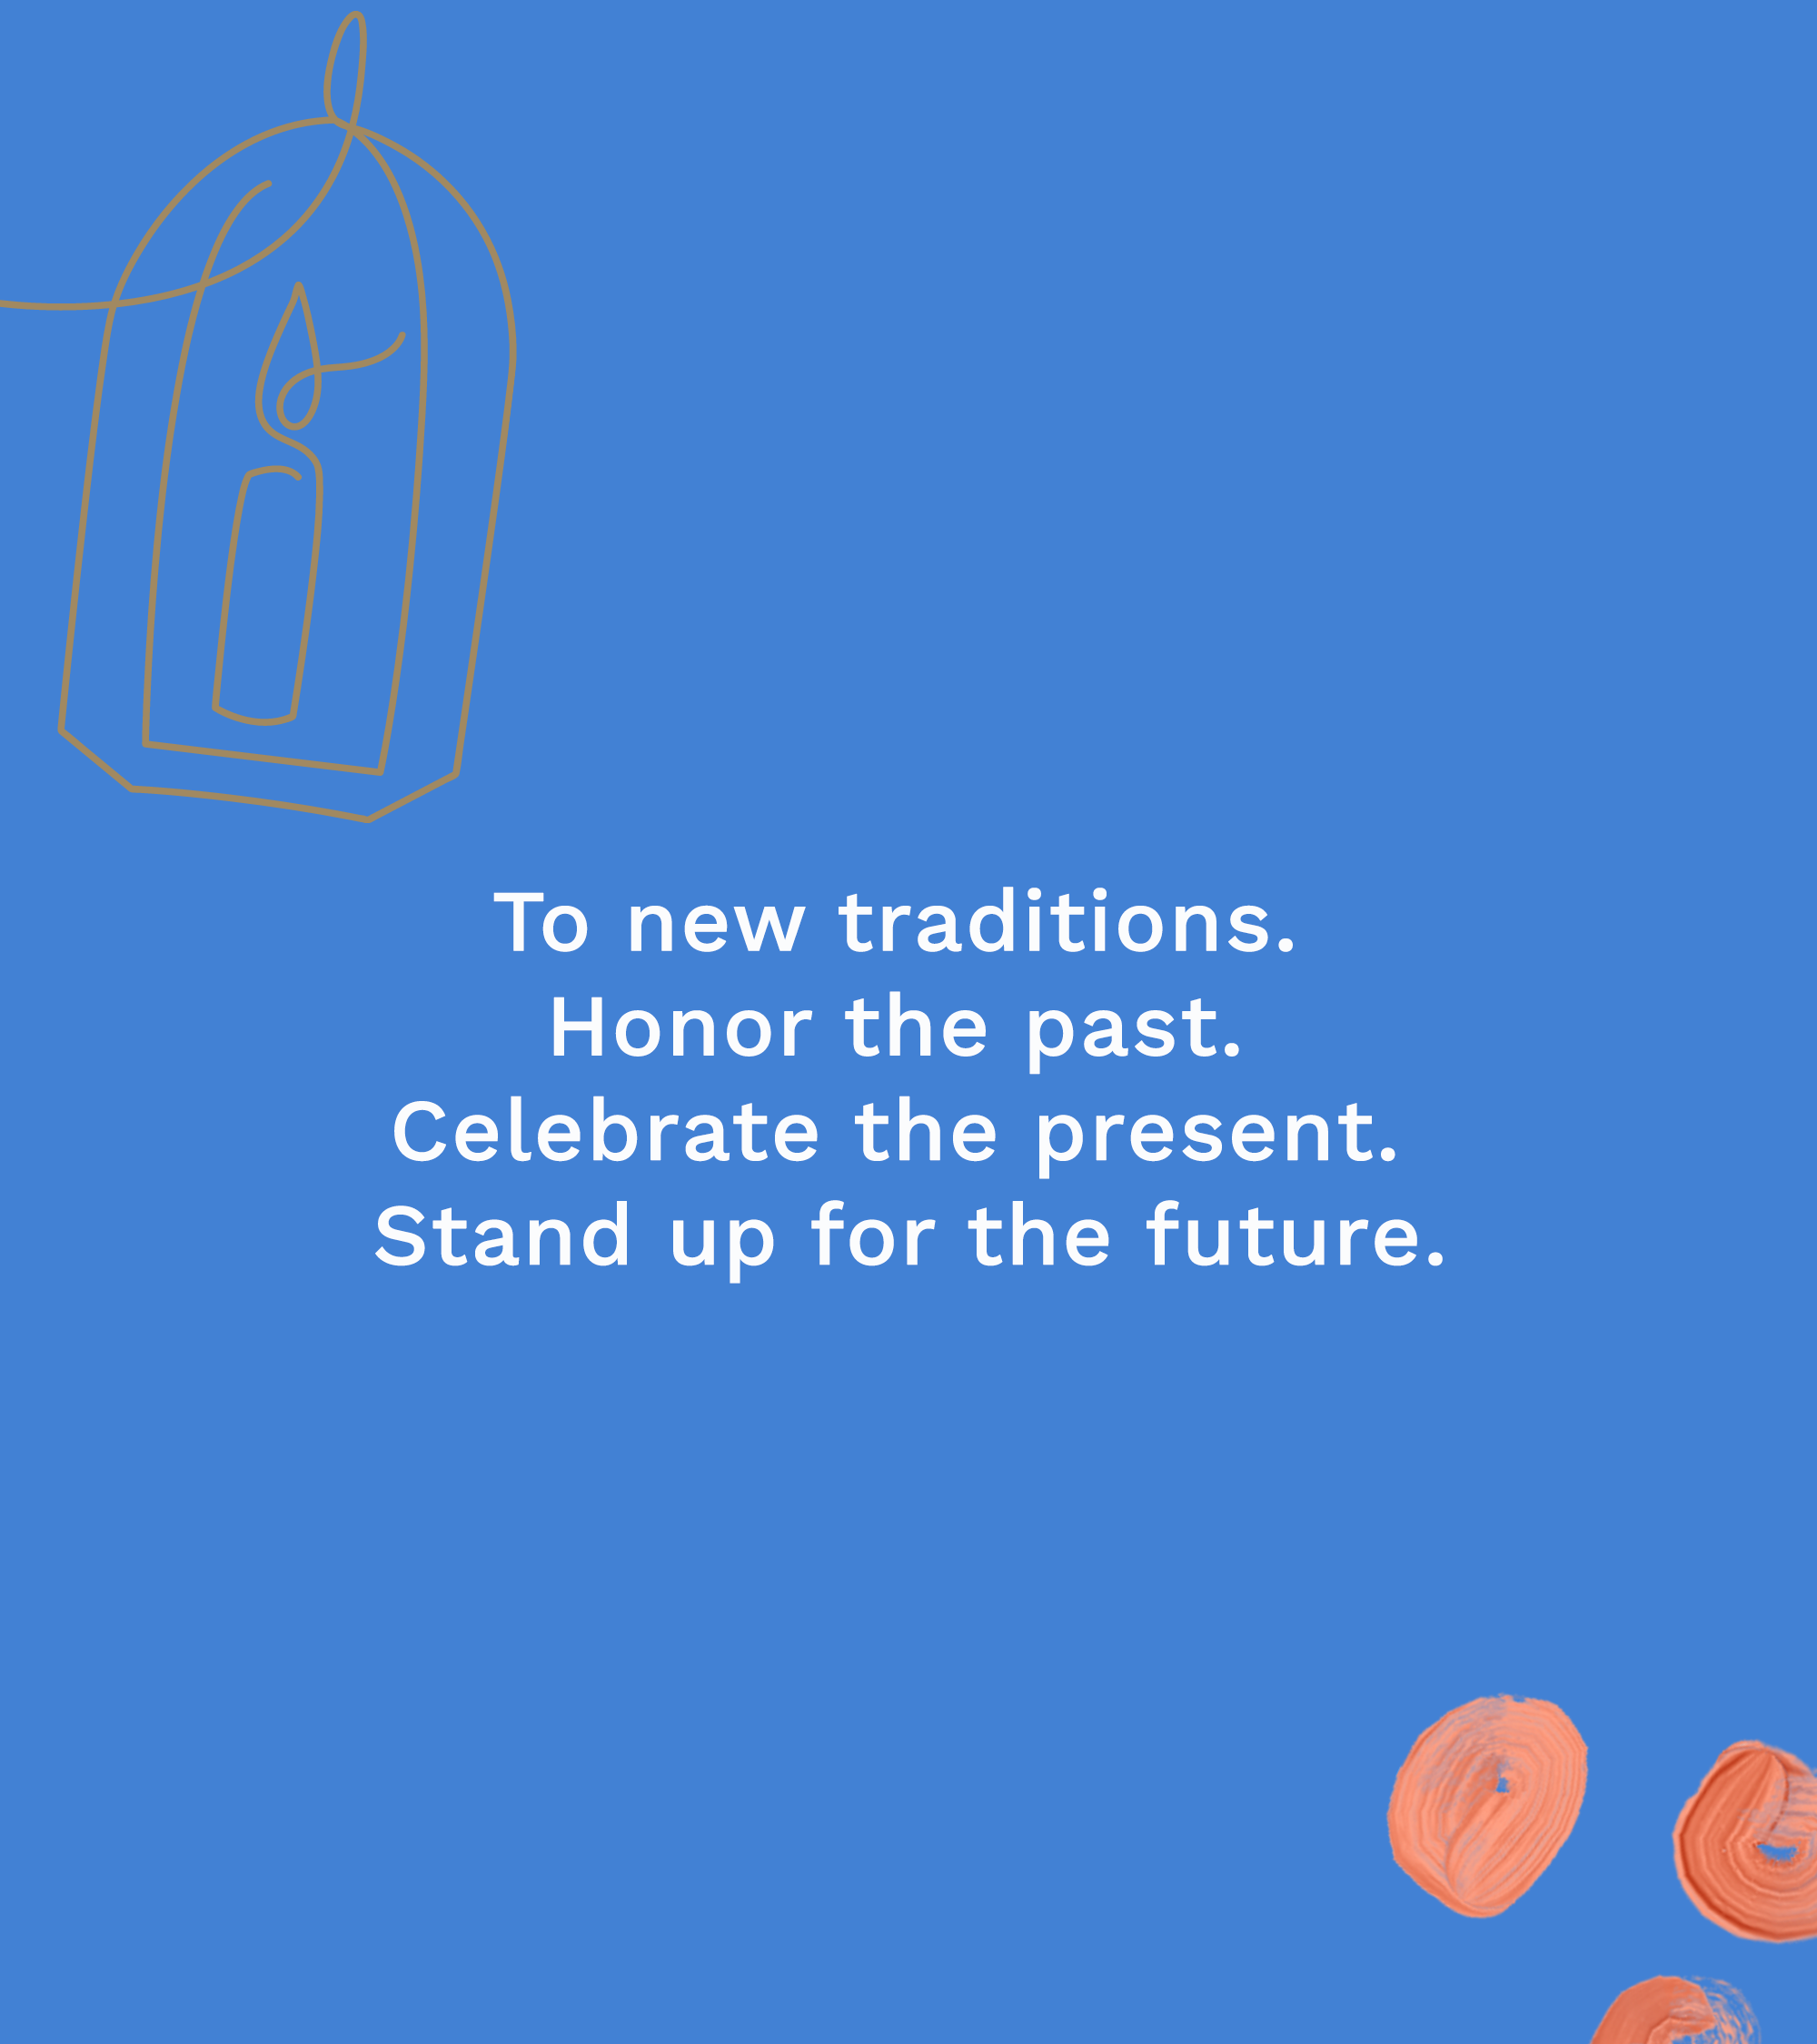 To new traditions. Honor the pass. Celebrate the present. Stand up for the future.